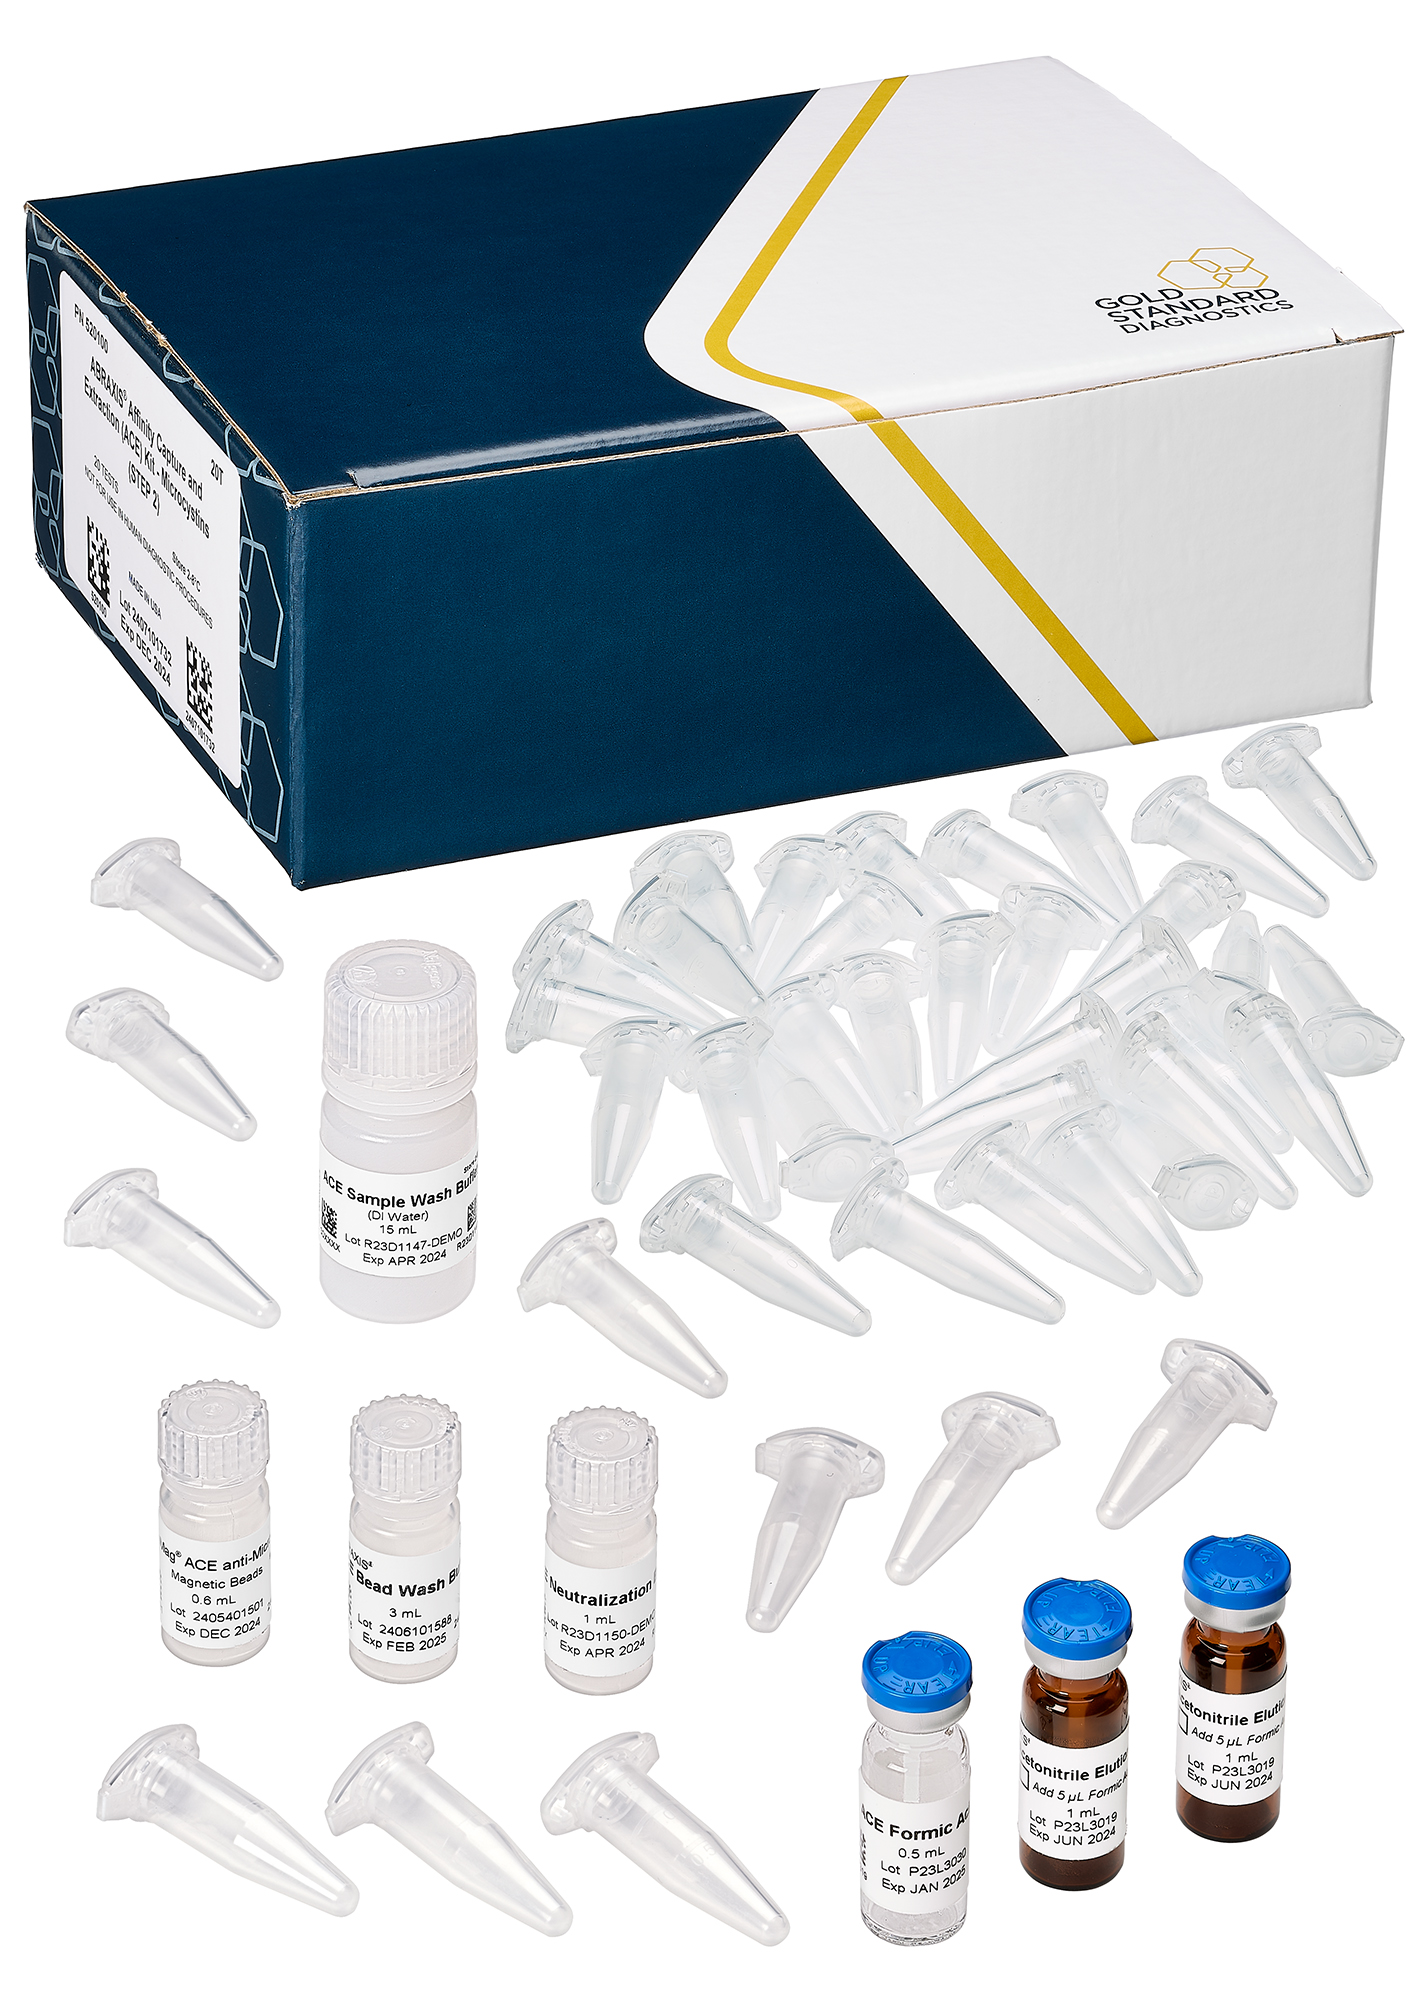 NEW!!! ABRAXIS® ACE (Affinity Capture & Extraction) – Microcystins Kit